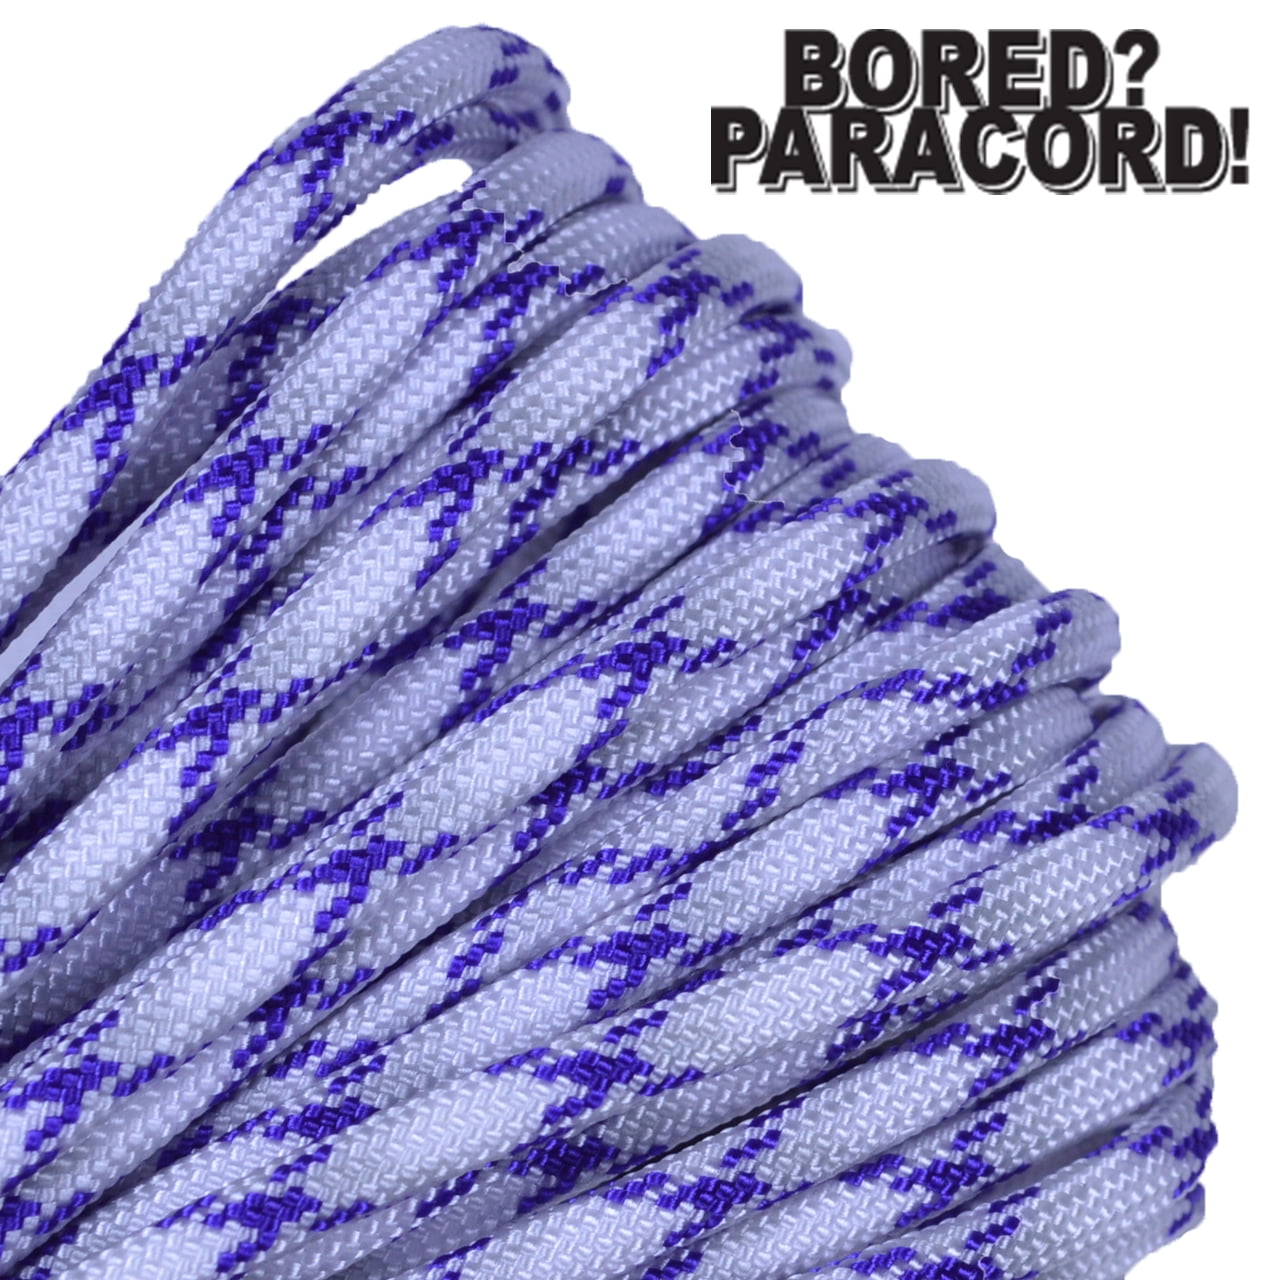 Bored Paracord Brand 550 lb Type III Paracord - Hometown Hero 1000